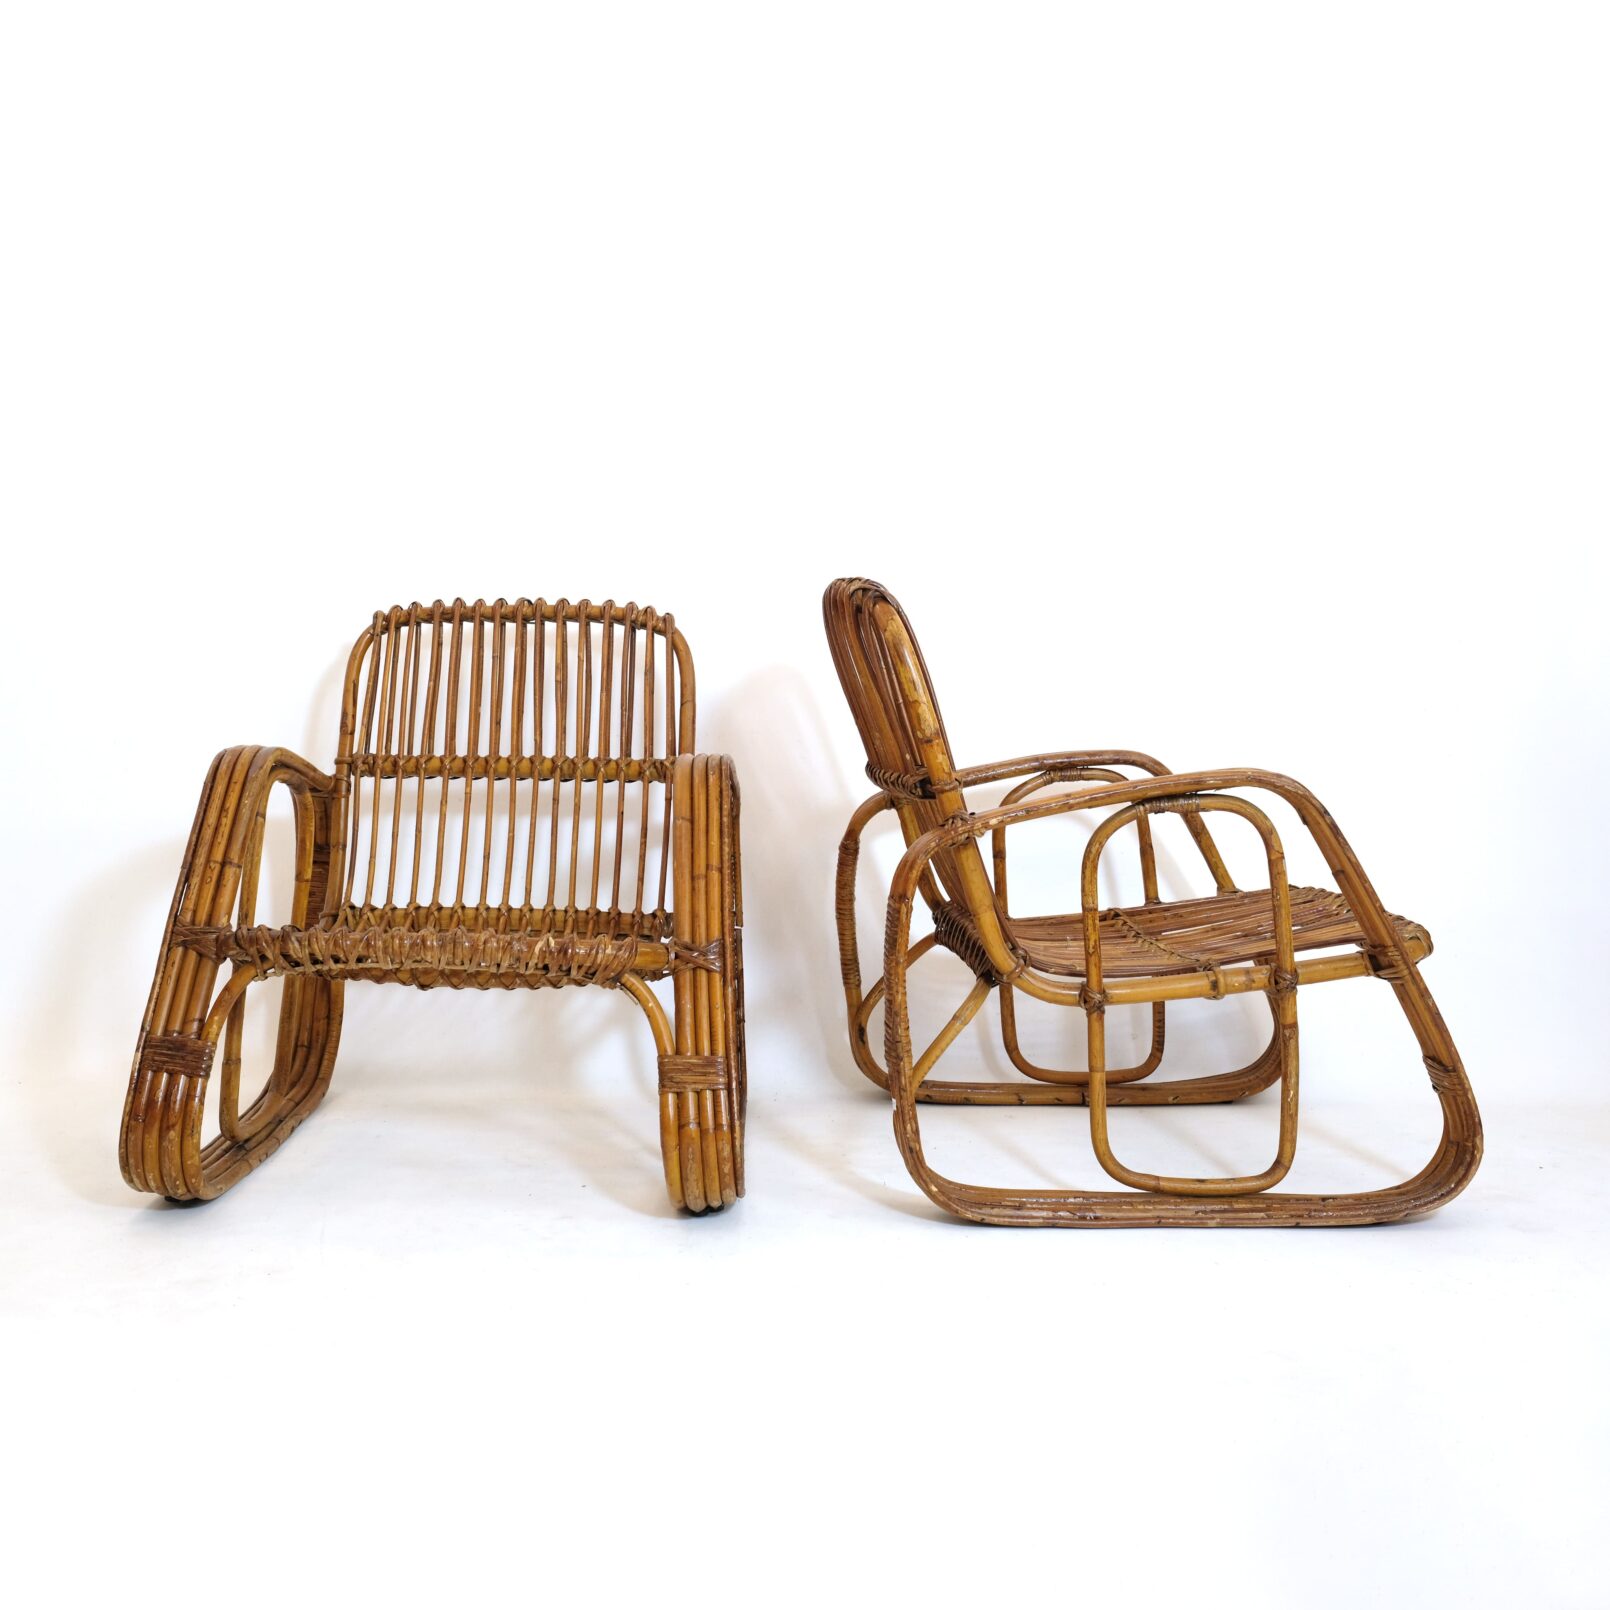 Pair of Italian rattan lounge chairs from the 1960s, no 2.